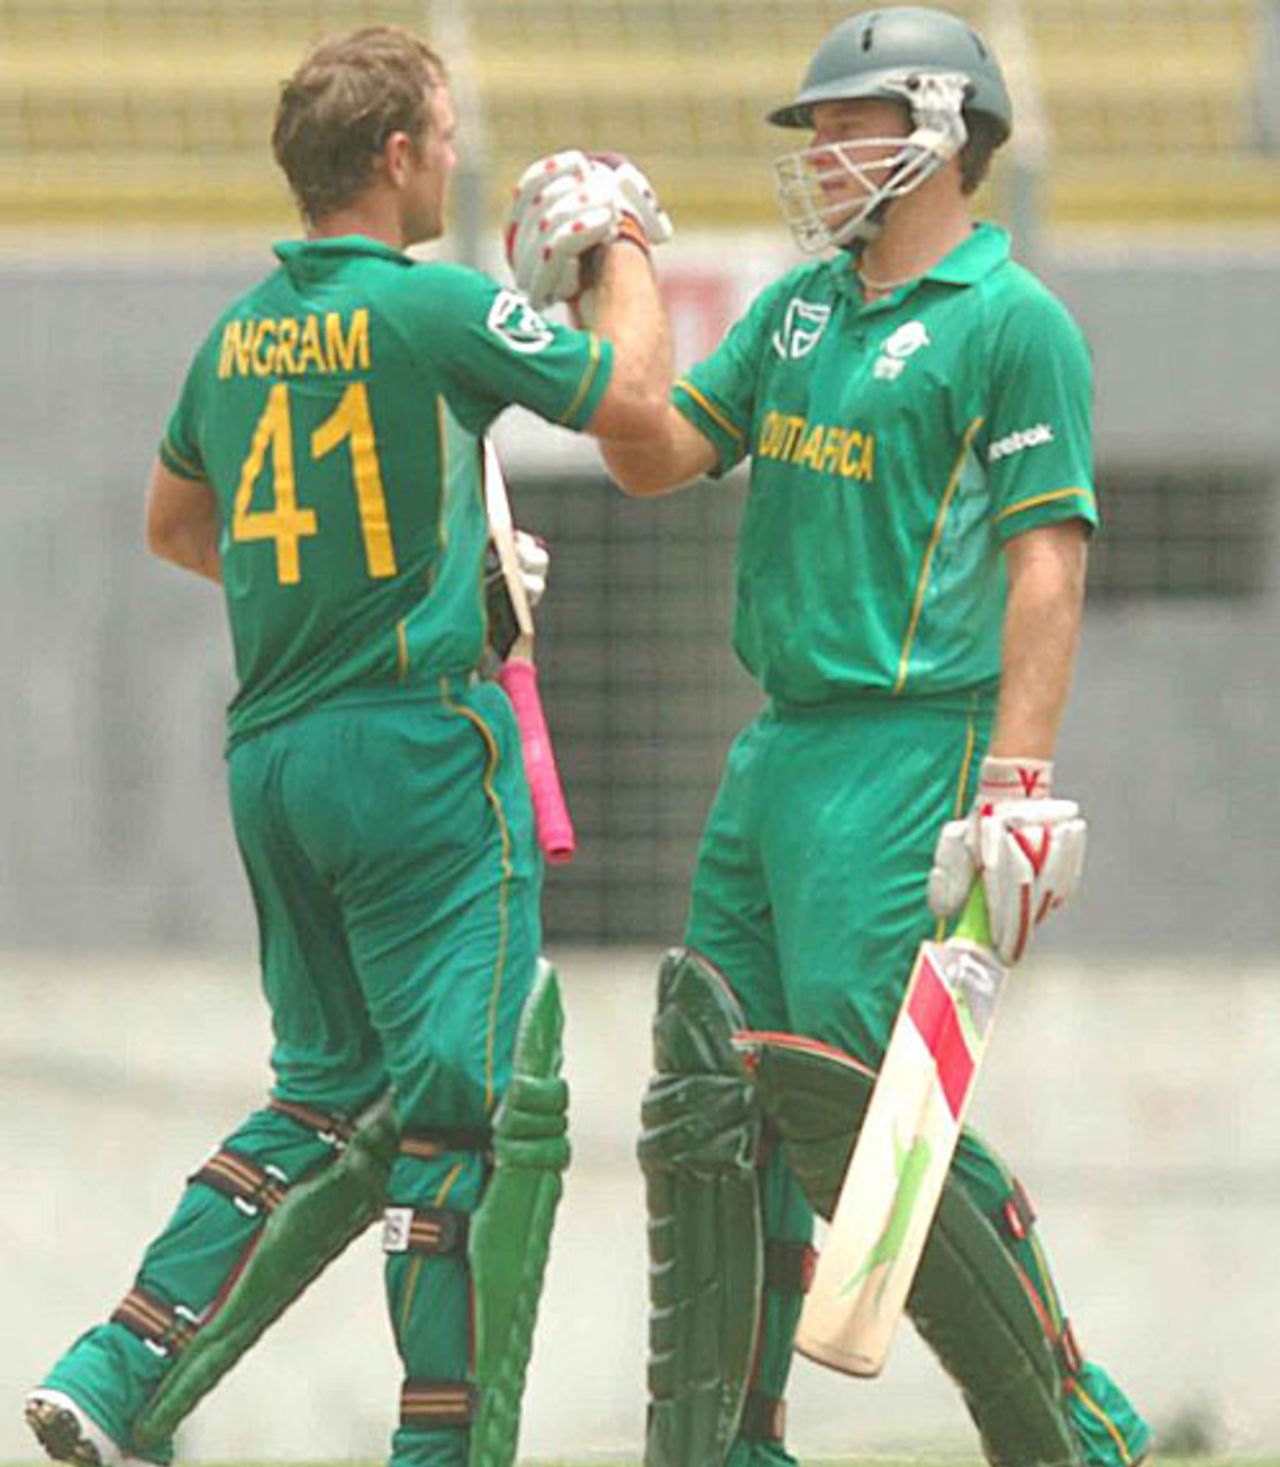 Colin Ingram and David Miller scored tons for South Africa A, Bangladesh A v South Africa A, 1st match, Mirpur, May 5, 2010